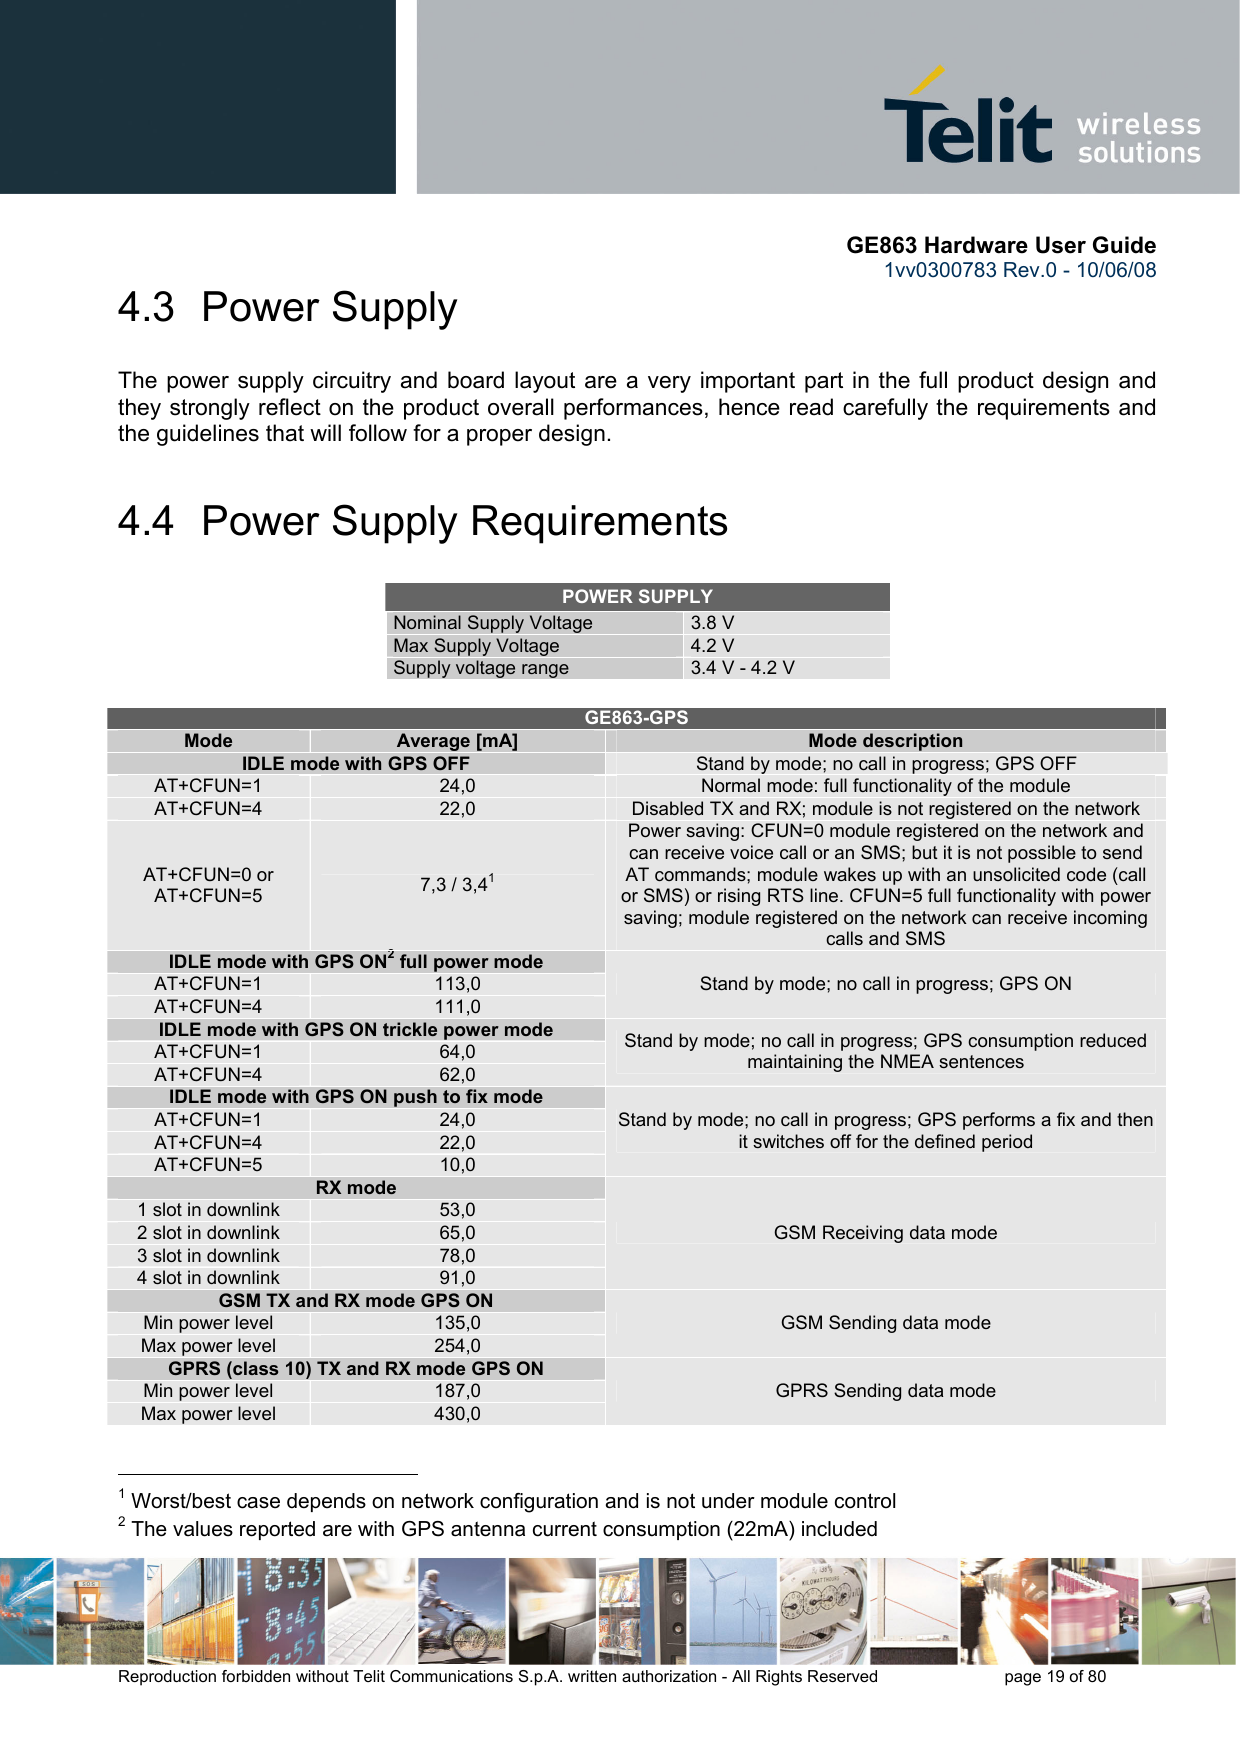       GE863 Hardware User Guide 1vv0300783 Rev.0 - 10/06/08 Reproduction forbidden without Telit Communications S.p.A. written authorization - All Rights Reserved    page 19 of 80  4.3 Power Supply The power supply circuitry and board layout are a very important part in the full product design and they strongly reflect on the product overall performances, hence read carefully the requirements and the guidelines that will follow for a proper design. 4.4  Power Supply Requirements POWER SUPPLY Nominal Supply Voltage 3.8 V Max Supply Voltage 4.2 V Supply voltage range  3.4 V - 4.2 V  GE863-GPS Mode   Average [mA]  Mode description IDLE mode with GPS OFF  Stand by mode; no call in progress; GPS OFF AT+CFUN=1  24,0  Normal mode: full functionality of the module AT+CFUN=4  22,0  Disabled TX and RX; module is not registered on the network AT+CFUN=0 or AT+CFUN=5  7,3 / 3,41 Power saving: CFUN=0 module registered on the network and can receive voice call or an SMS; but it is not possible to send AT commands; module wakes up with an unsolicited code (call or SMS) or rising RTS line. CFUN=5 full functionality with power saving; module registered on the network can receive incoming calls and SMS  IDLE mode with GPS ON2 full power mode AT+CFUN=1  113,0 AT+CFUN=4  111,0 Stand by mode; no call in progress; GPS ON IDLE mode with GPS ON trickle power mode AT+CFUN=1  64,0 AT+CFUN=4  62,0 Stand by mode; no call in progress; GPS consumption reduced maintaining the NMEA sentences IDLE mode with GPS ON push to fix mode AT+CFUN=1  24,0 AT+CFUN=4  22,0 AT+CFUN=5  10,0 Stand by mode; no call in progress; GPS performs a fix and then it switches off for the defined period RX mode 1 slot in downlink  53,0 2 slot in downlink  65,0 3 slot in downlink  78,0 4 slot in downlink  91,0 GSM Receiving data mode GSM TX and RX mode GPS ON Min power level  135,0 Max power level  254,0 GSM Sending data mode GPRS (class 10) TX and RX mode GPS ON Min power level  187,0 Max power level  430,0 GPRS Sending data mode                                                   1 Worst/best case depends on network configuration and is not under module control  2 The values reported are with GPS antenna current consumption (22mA) included  